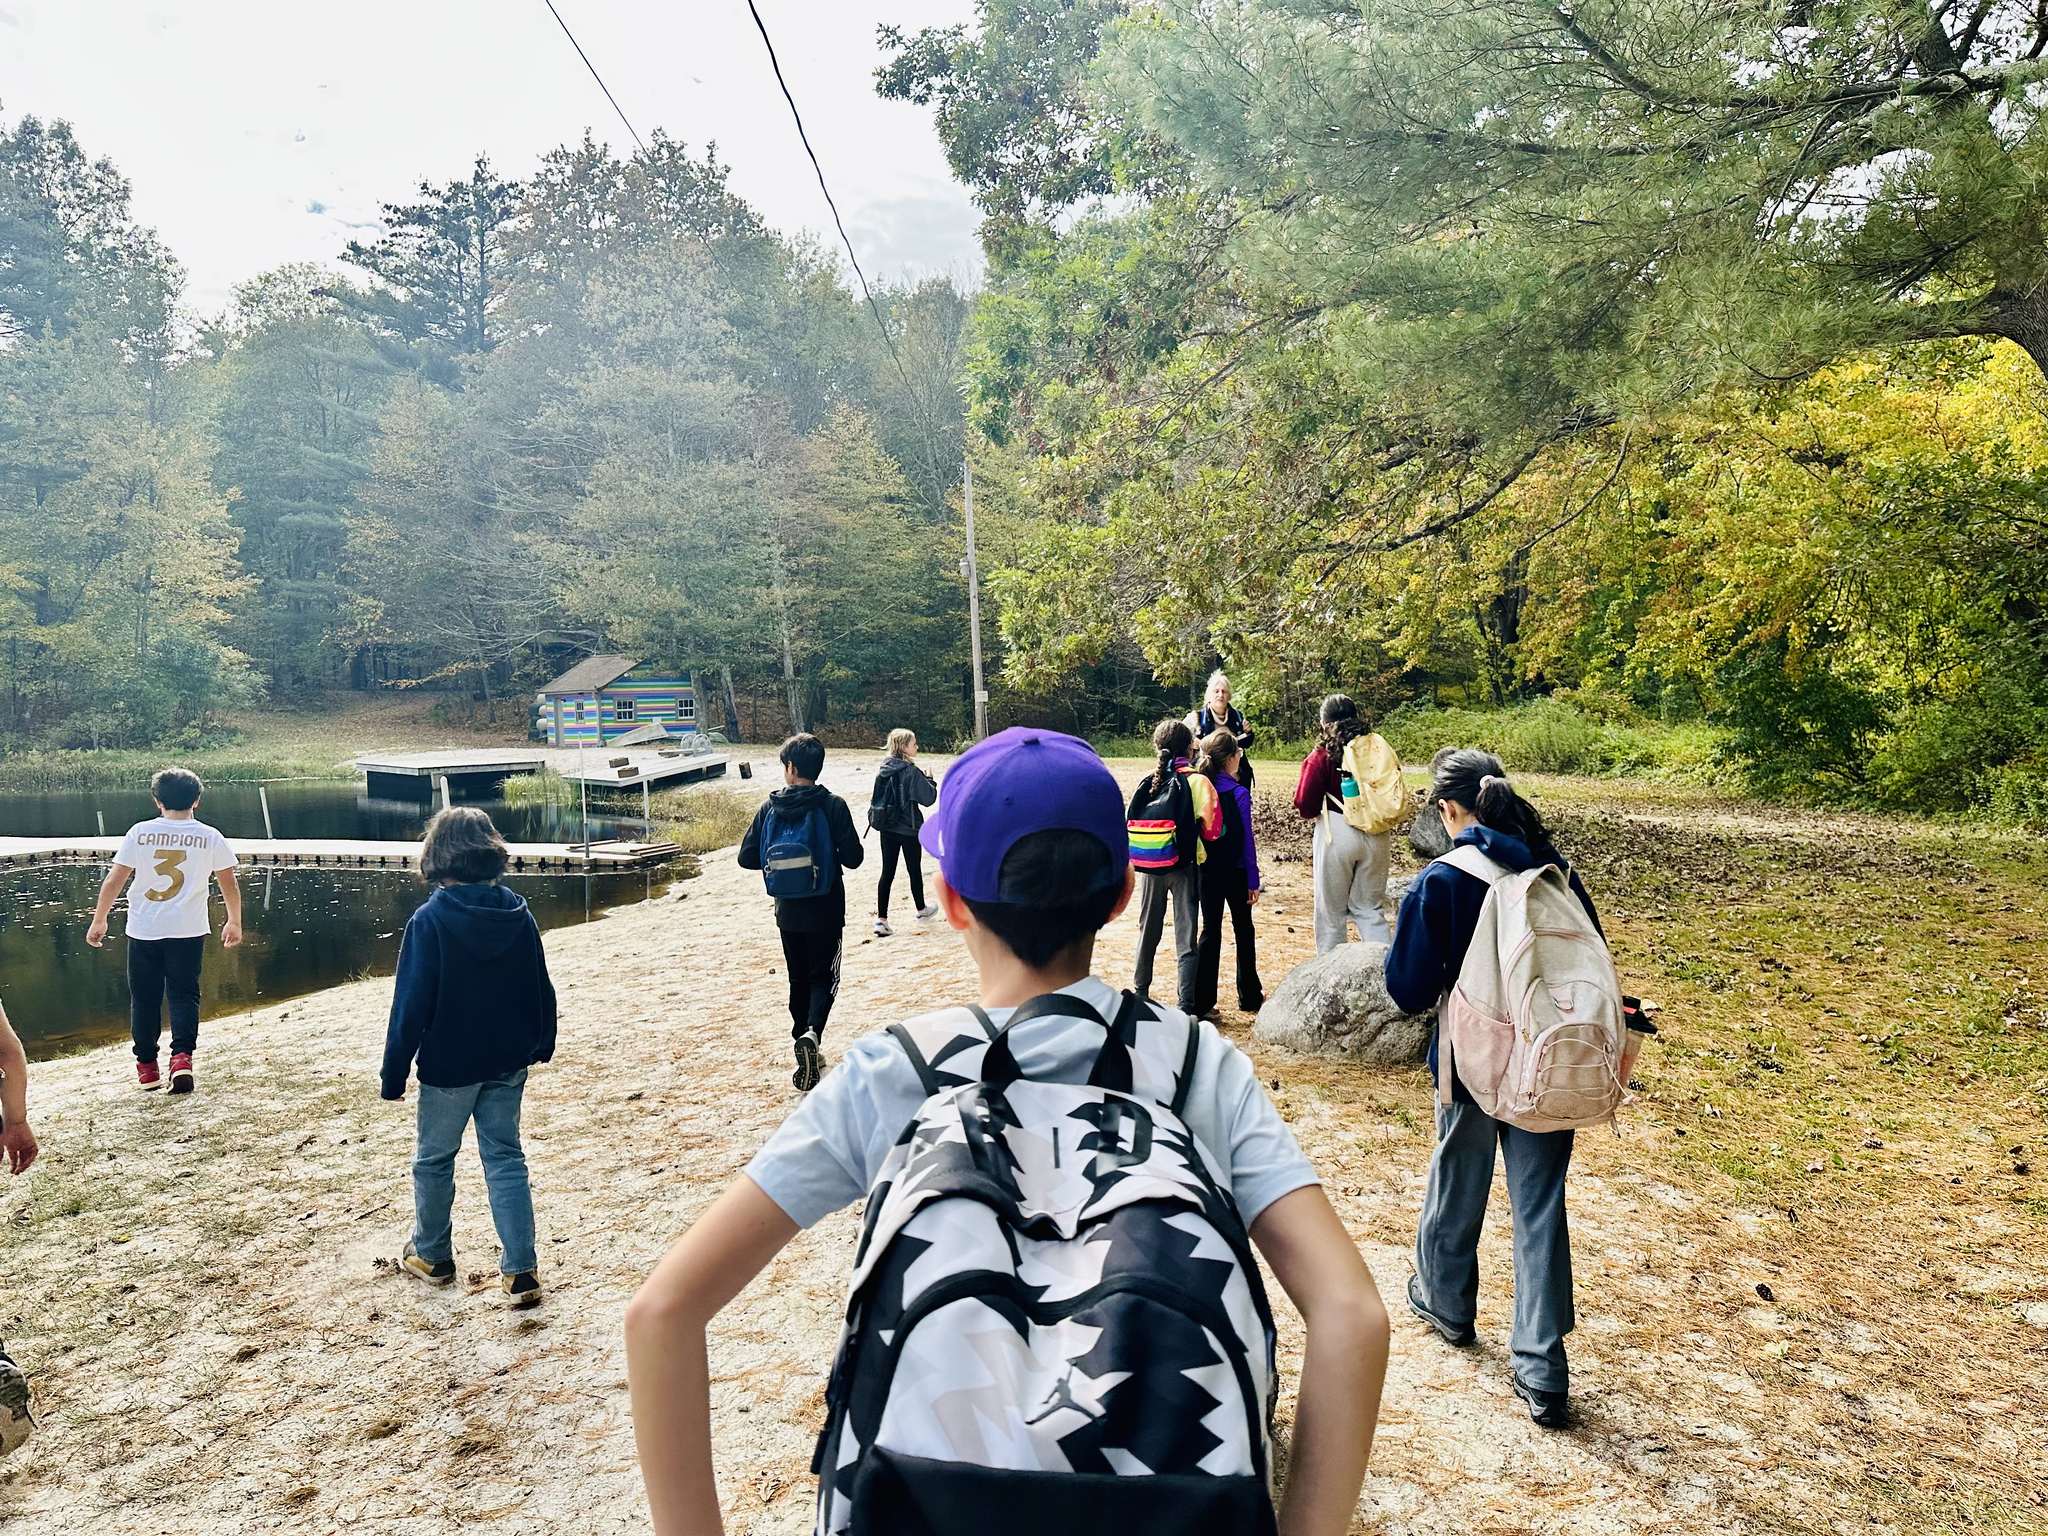 Ethical Culture students hike to a lake together at Nature's Classroom.